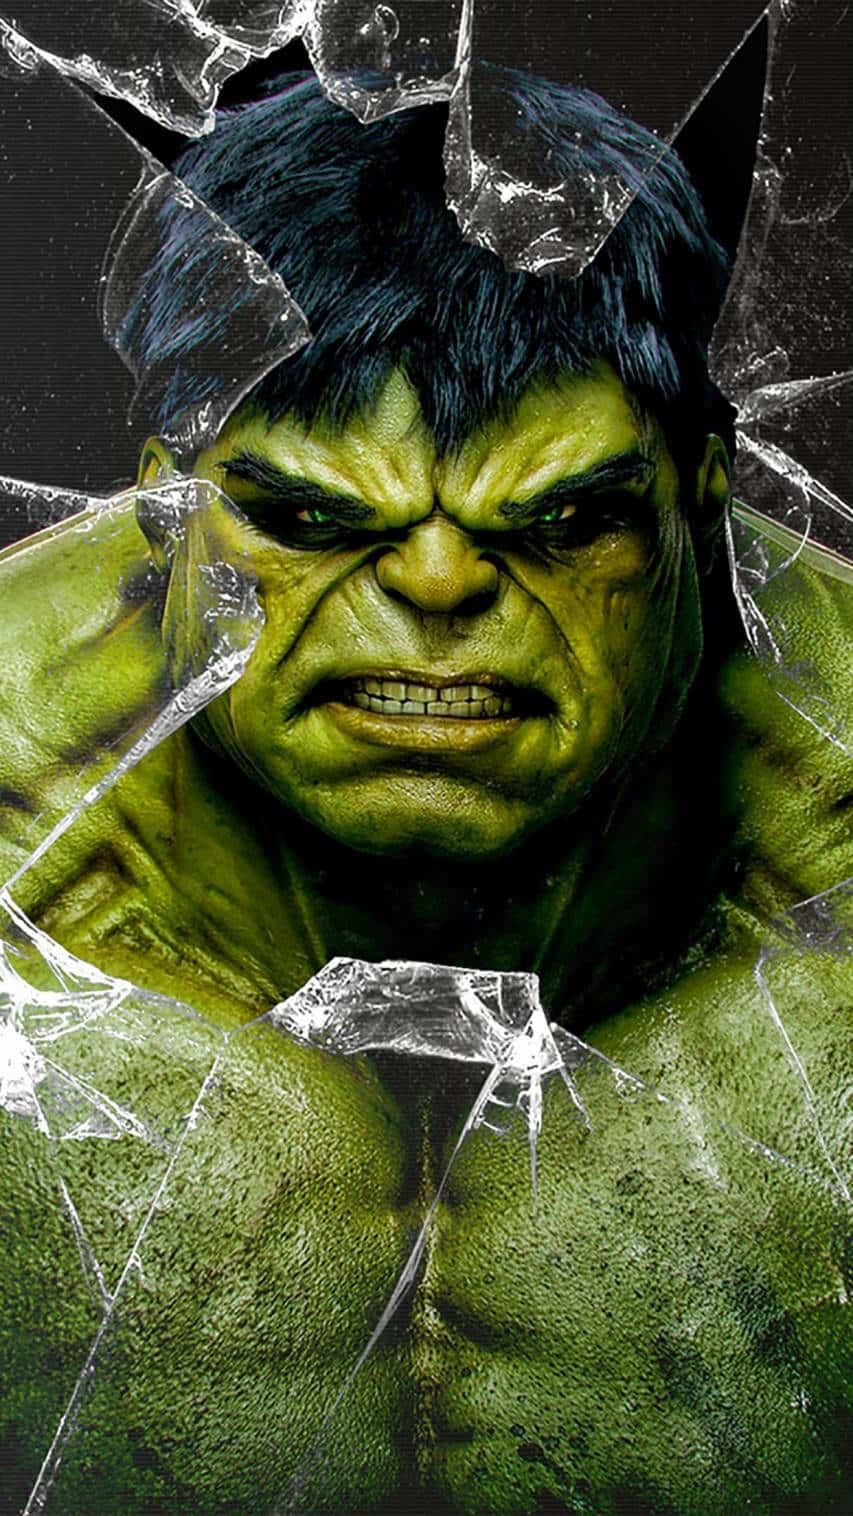 The Incredible Hulk unleashes his anger